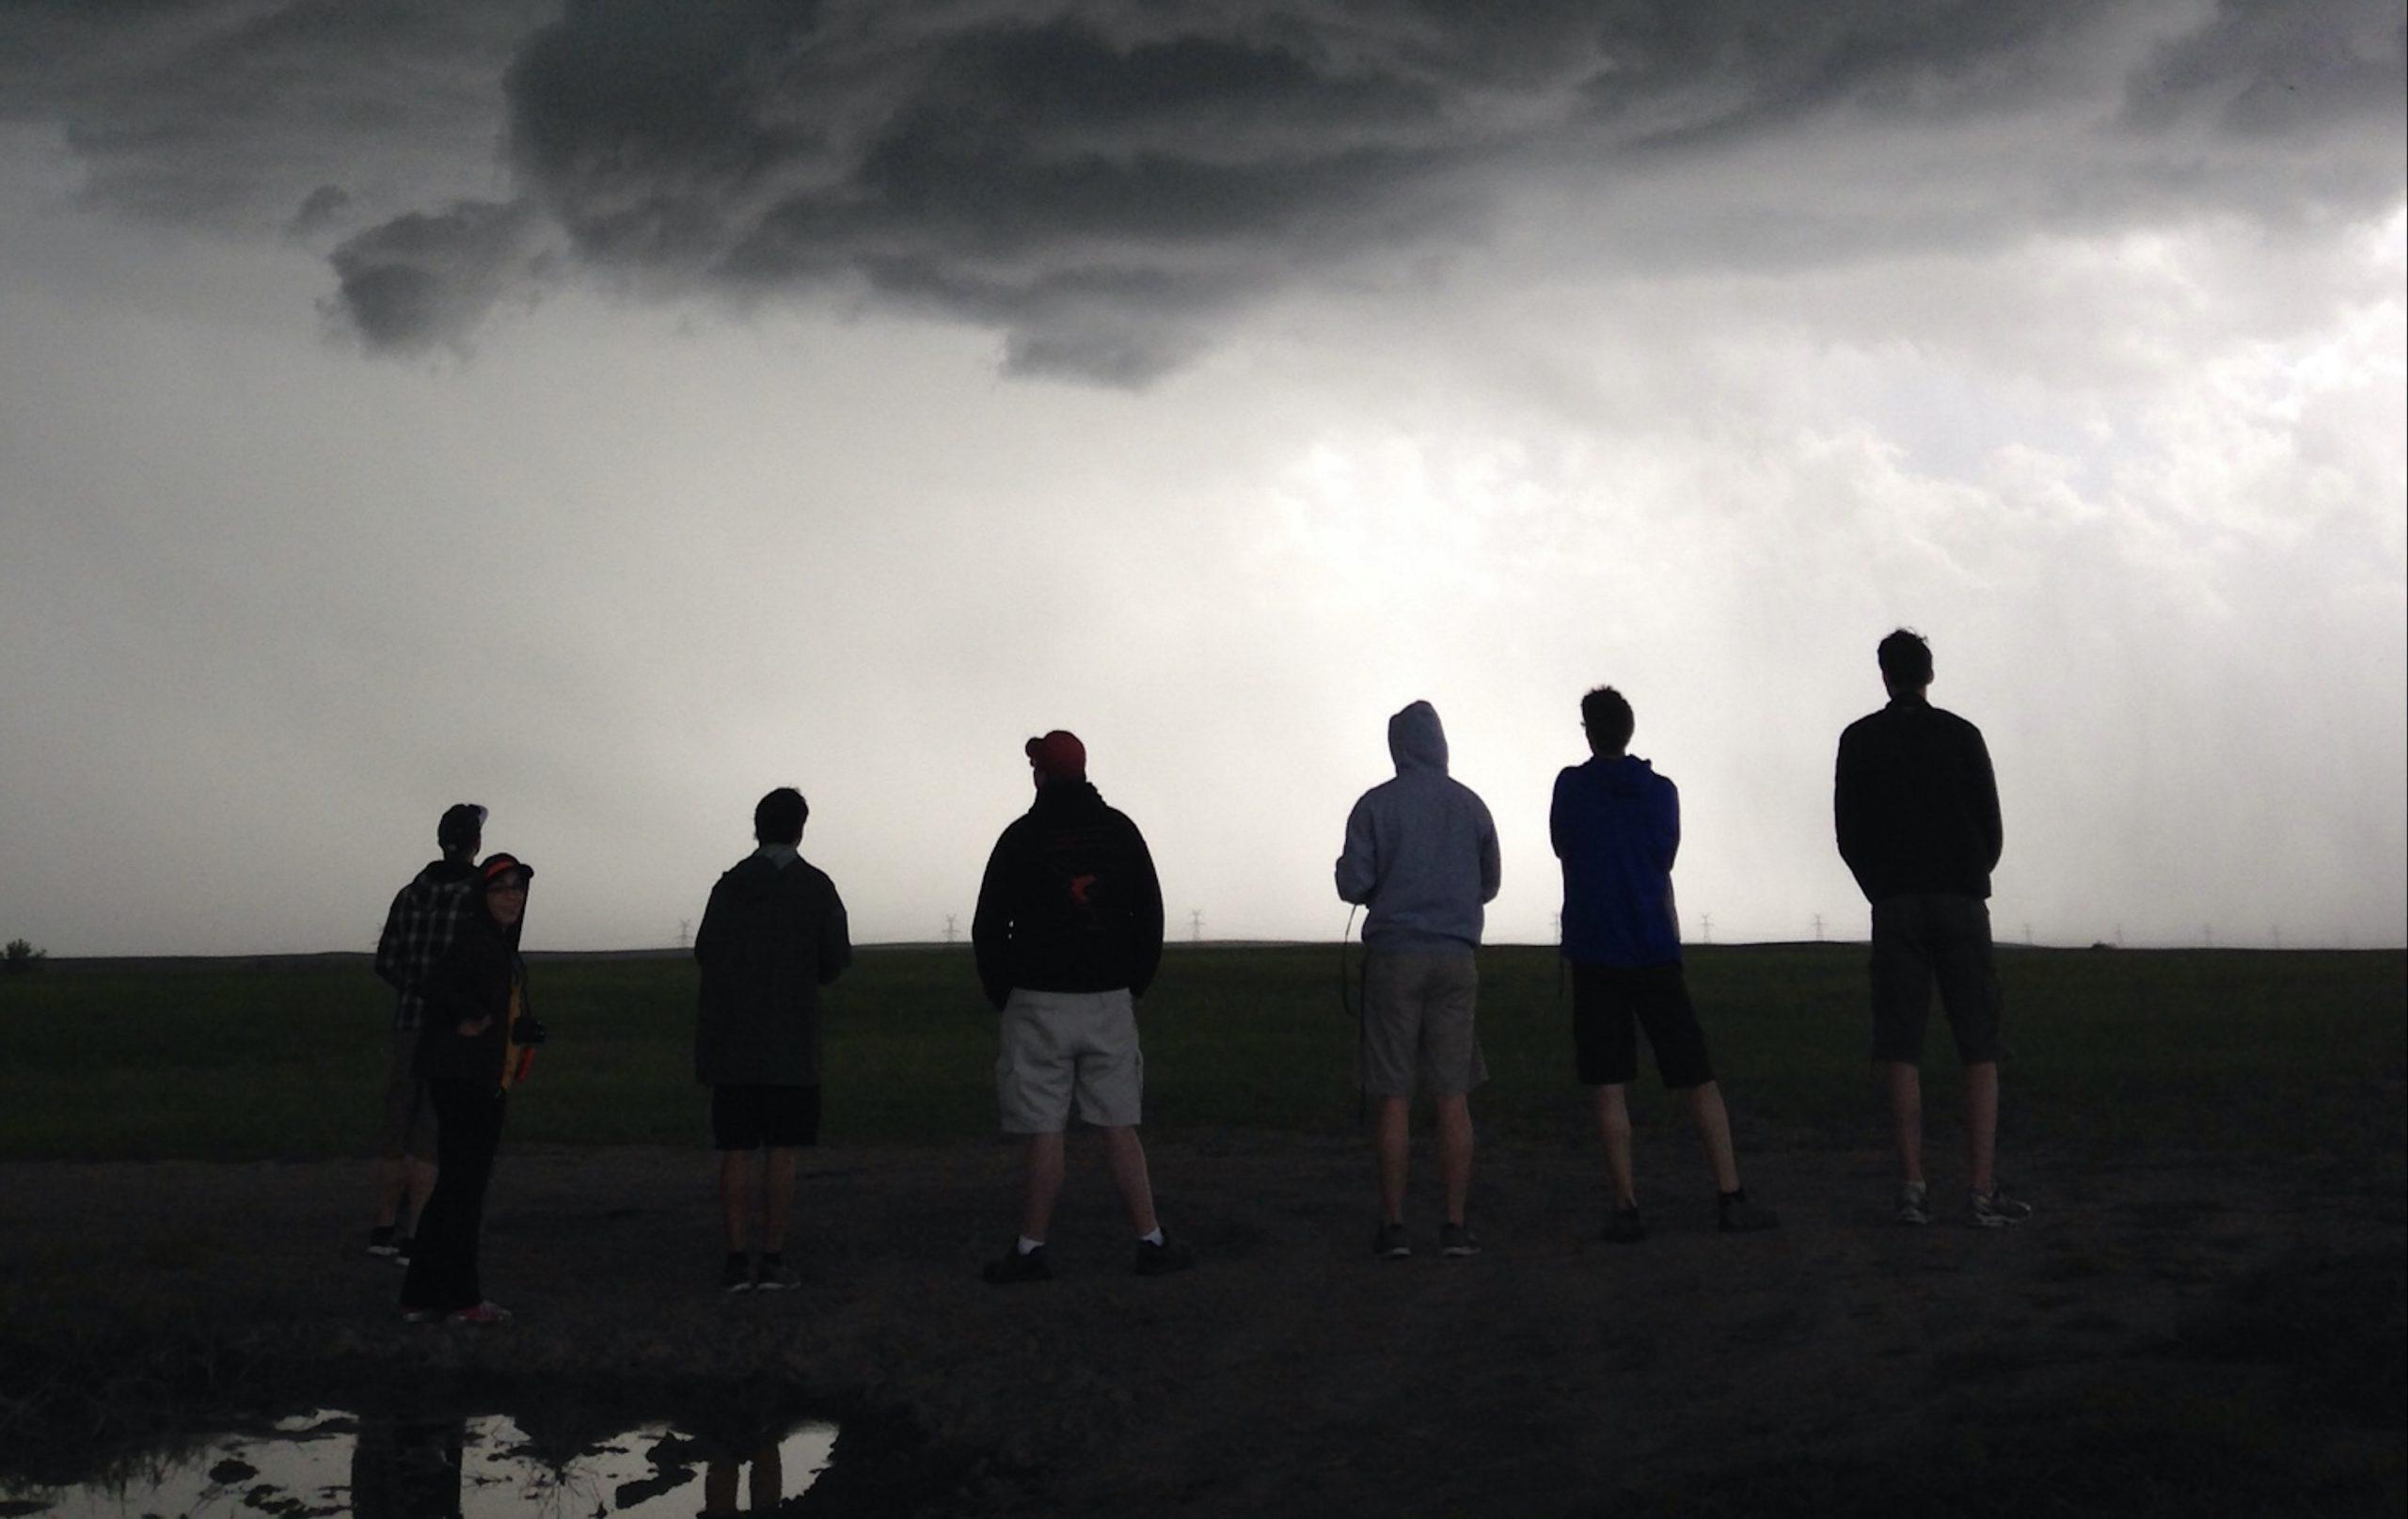 Students watching the storm